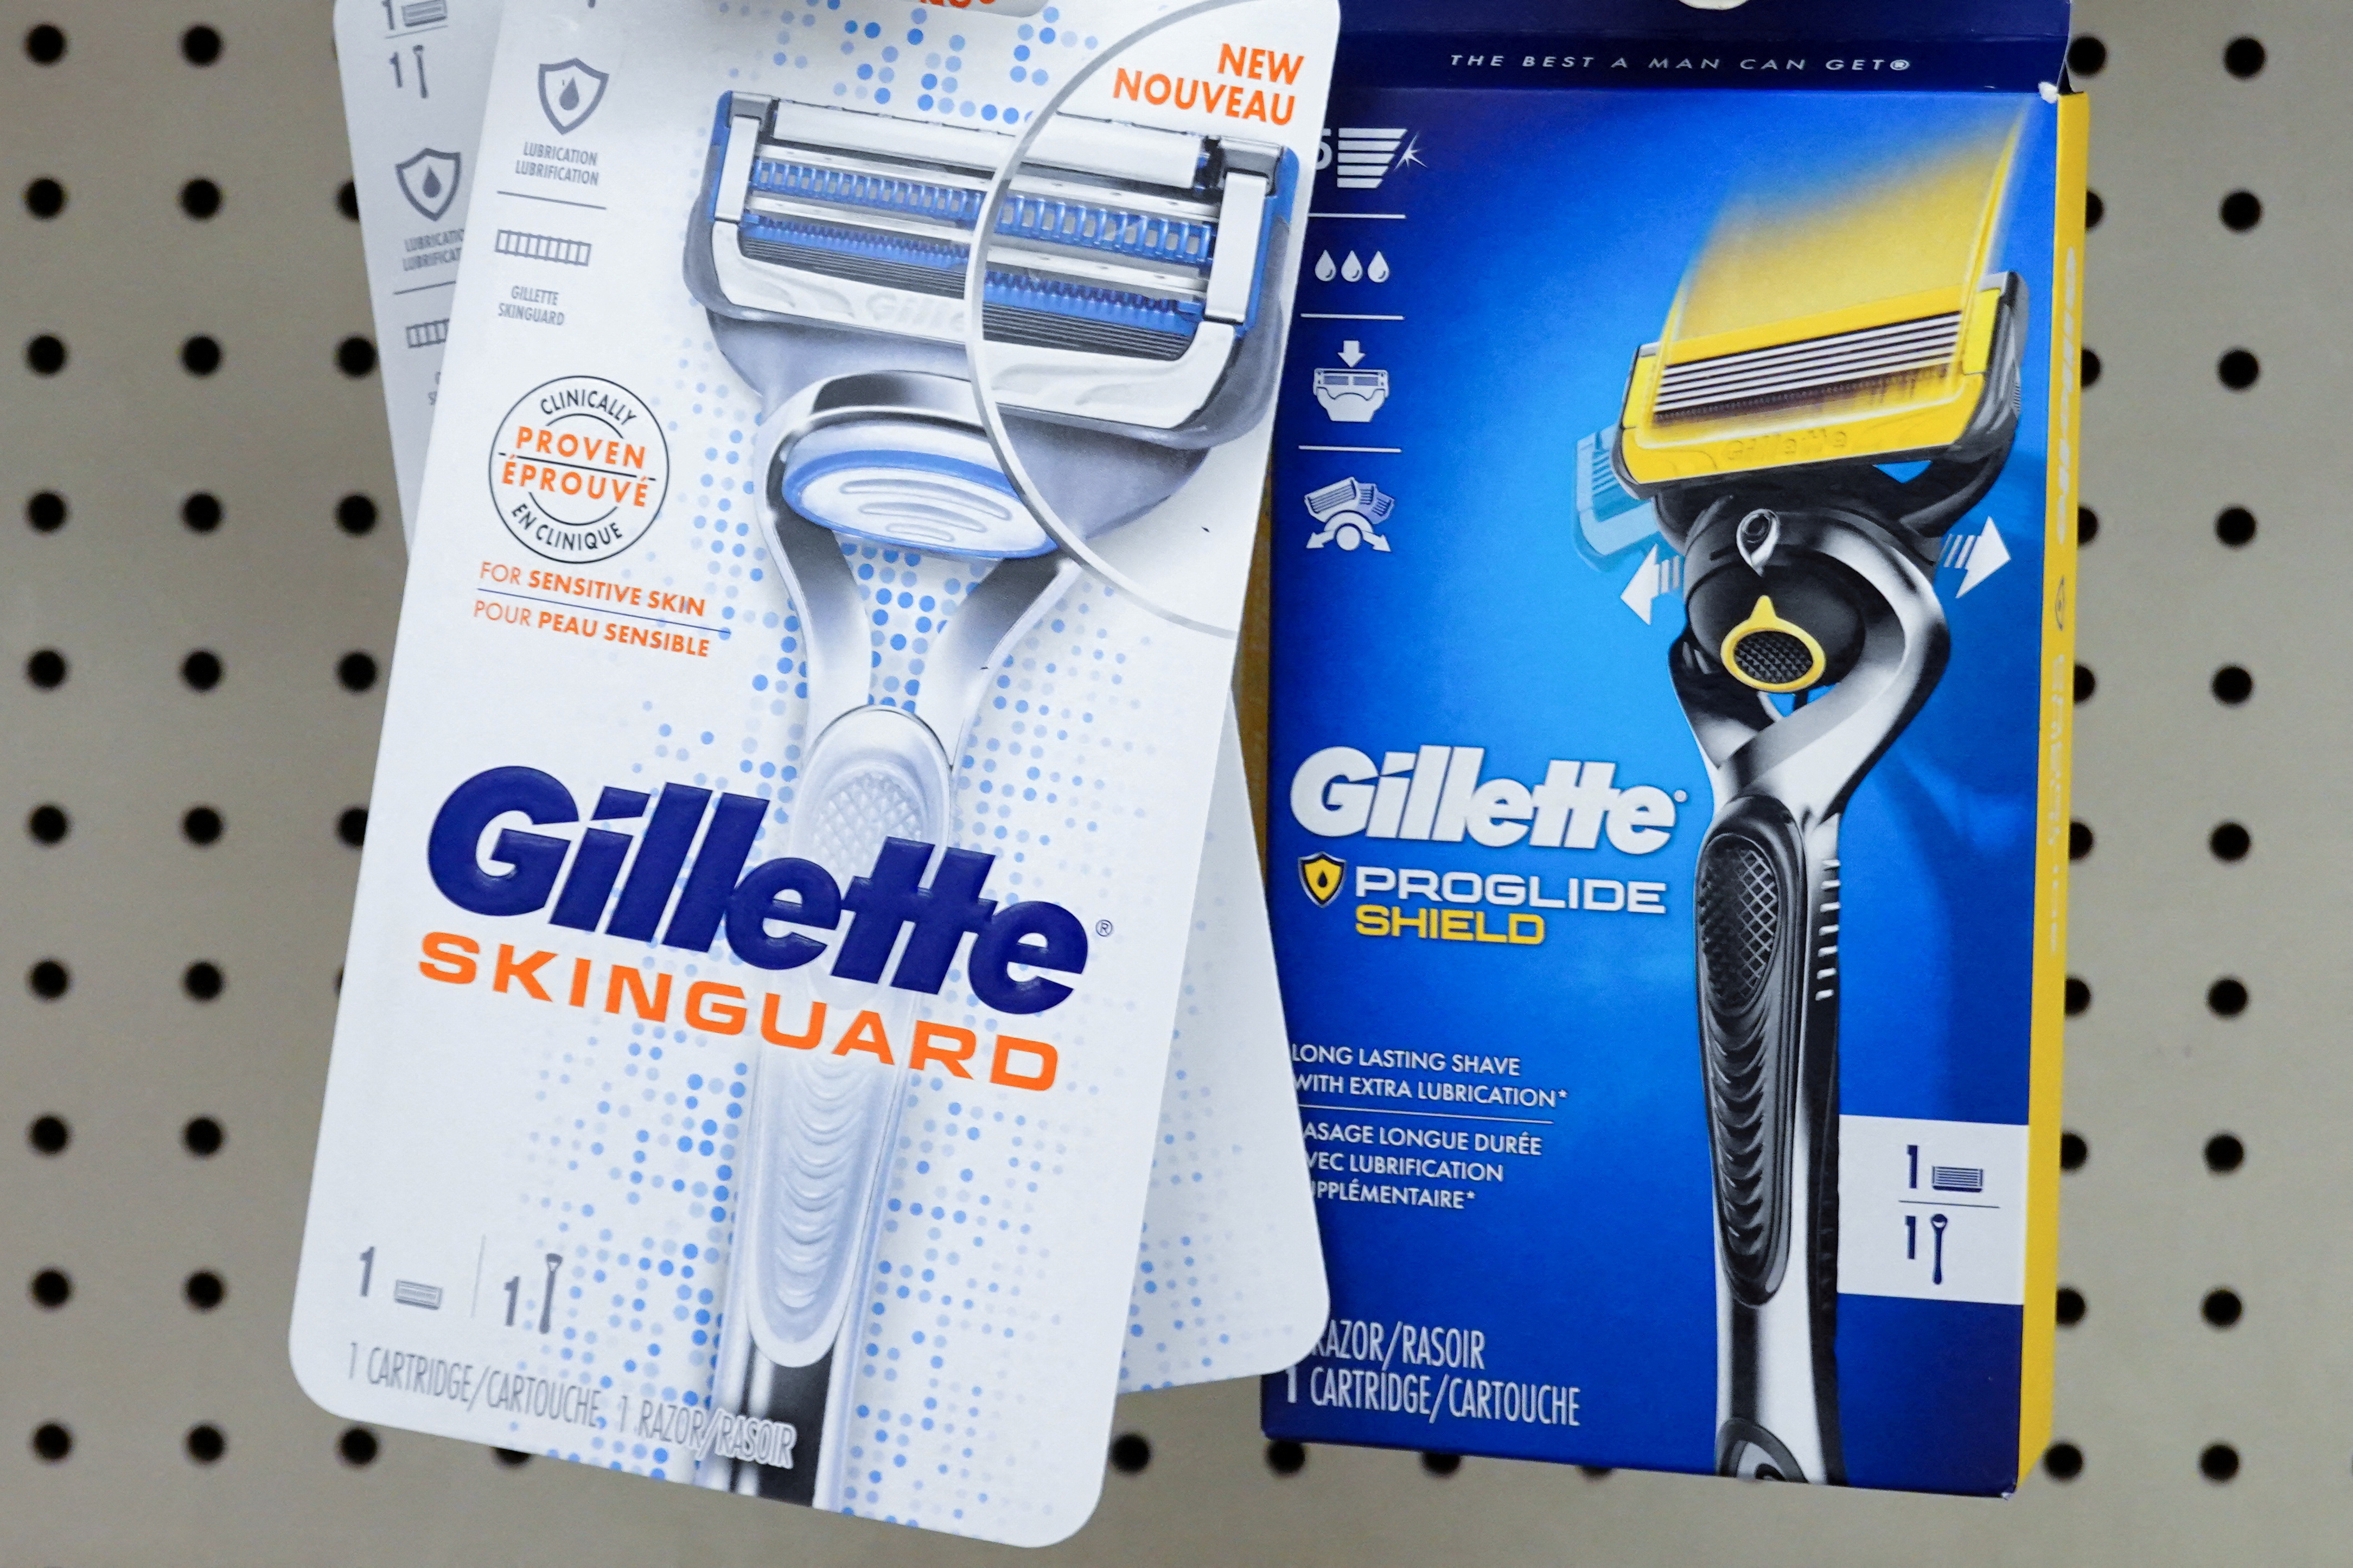 Gillette razors, a brand owned by Procter & Gamble, 